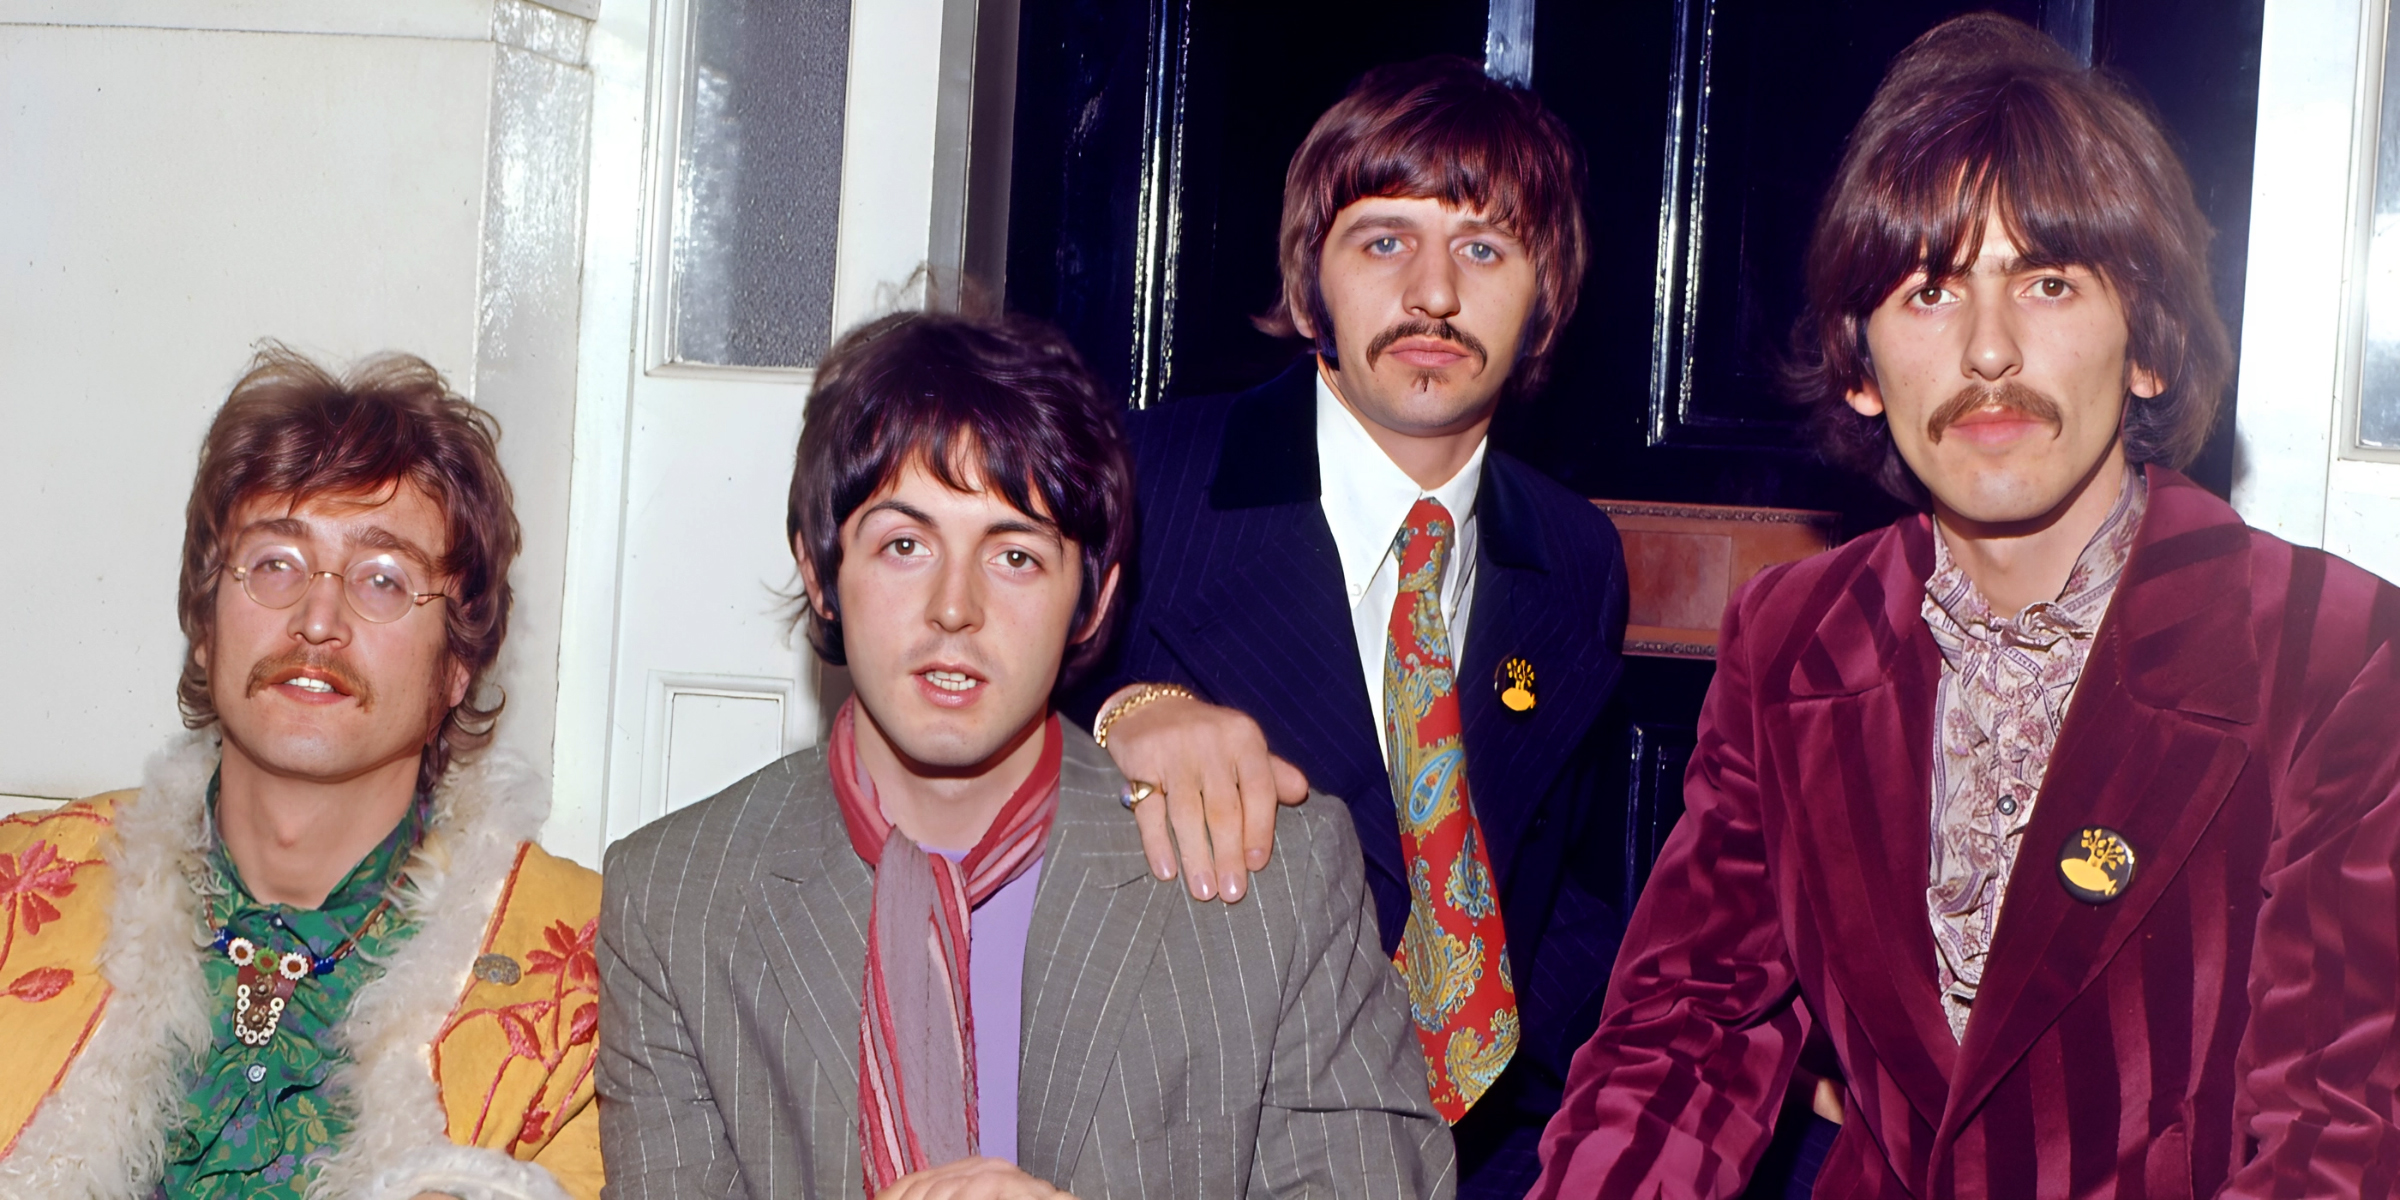 The Beatles | Source: Getty Imaes